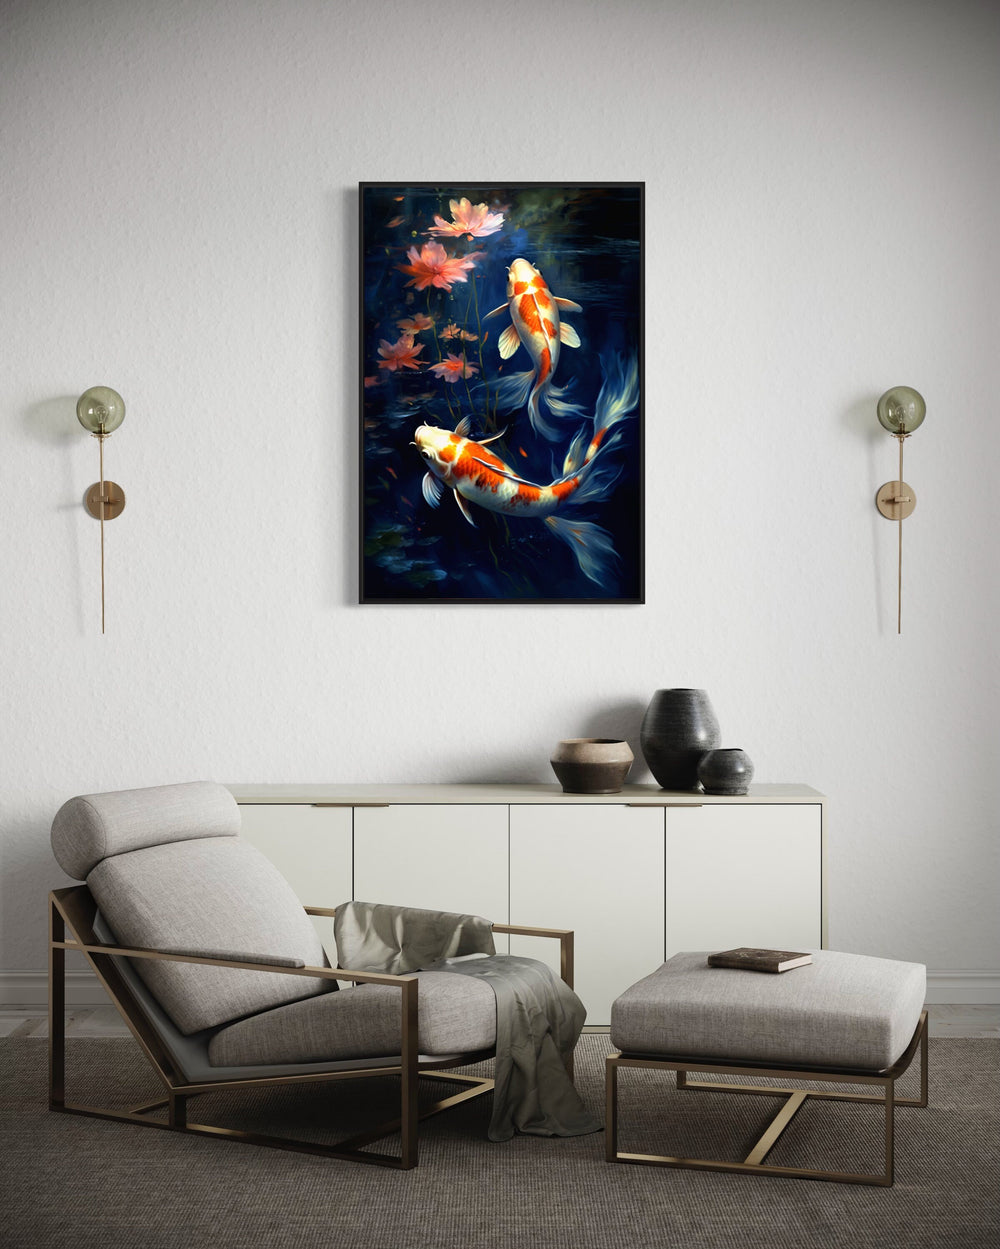 Koi Fish On Blue Feng Shui Wall Art in living room